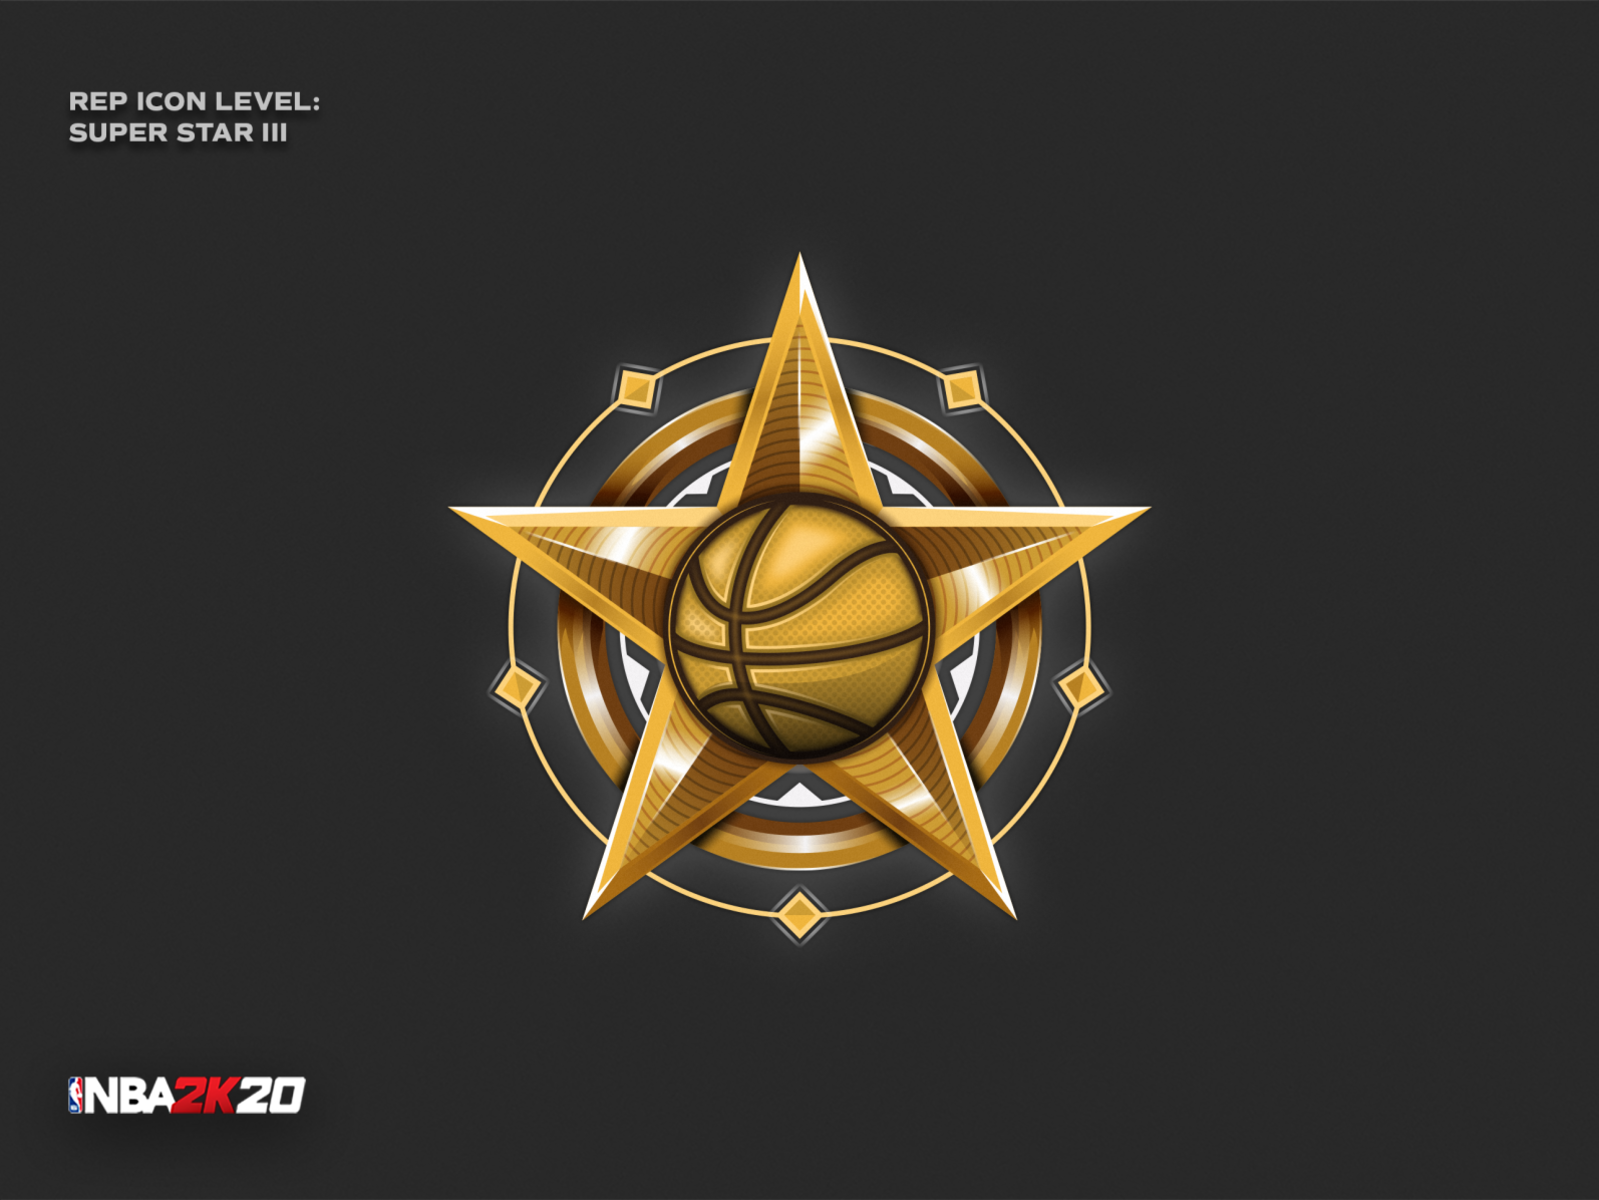 Nba 2k20 Super Star Iii Rep Icon By Michal Ruchel On Dribbble